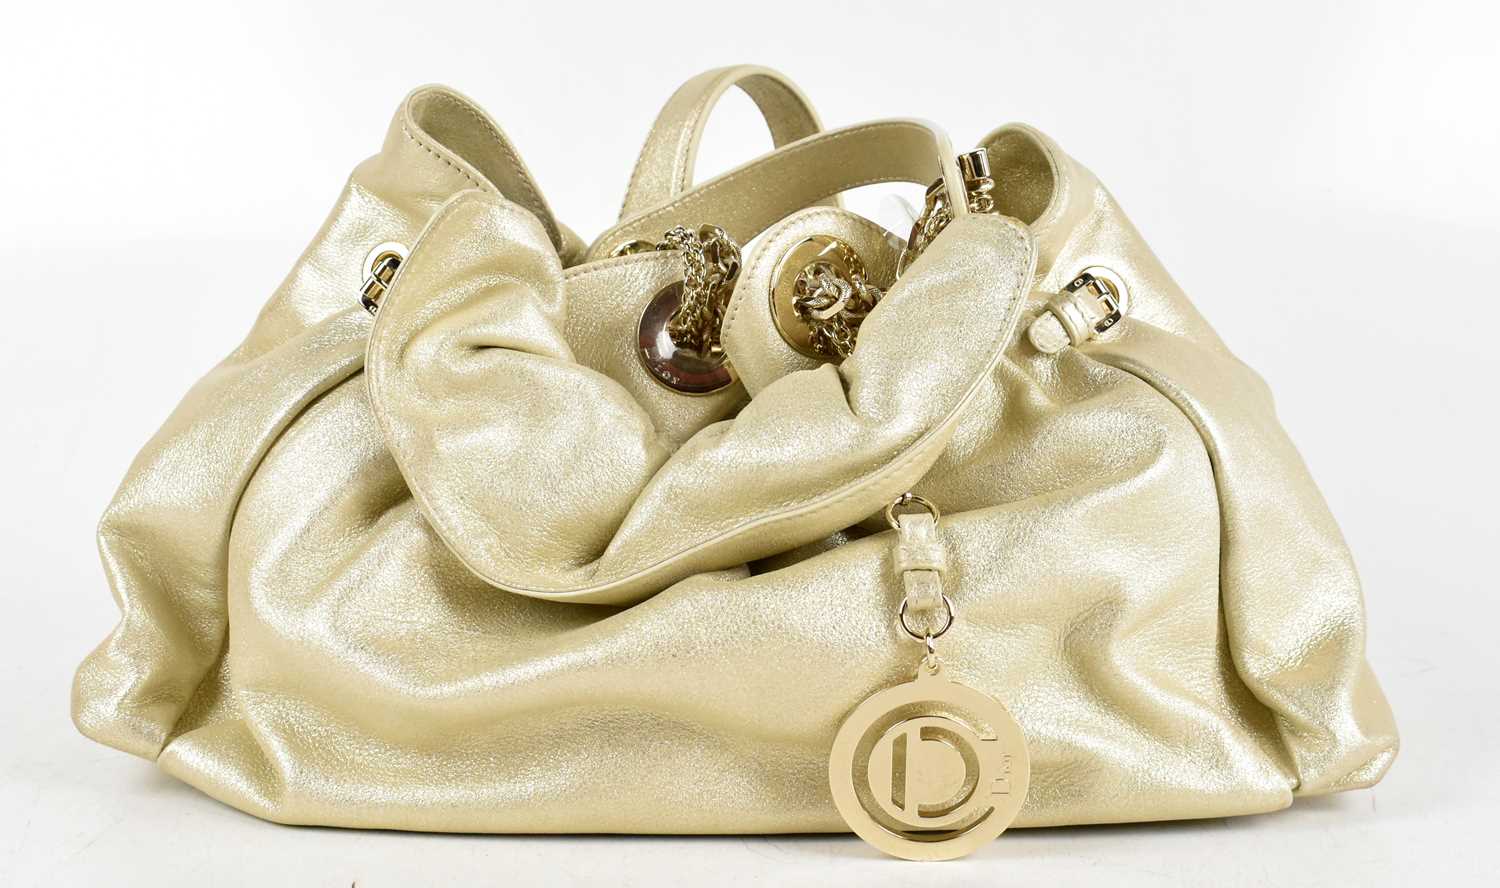 CHRISTIAN DIOR; a metallic gold leather 'Le Trente Hobo' handbag, hand stitched with heavy gold tone